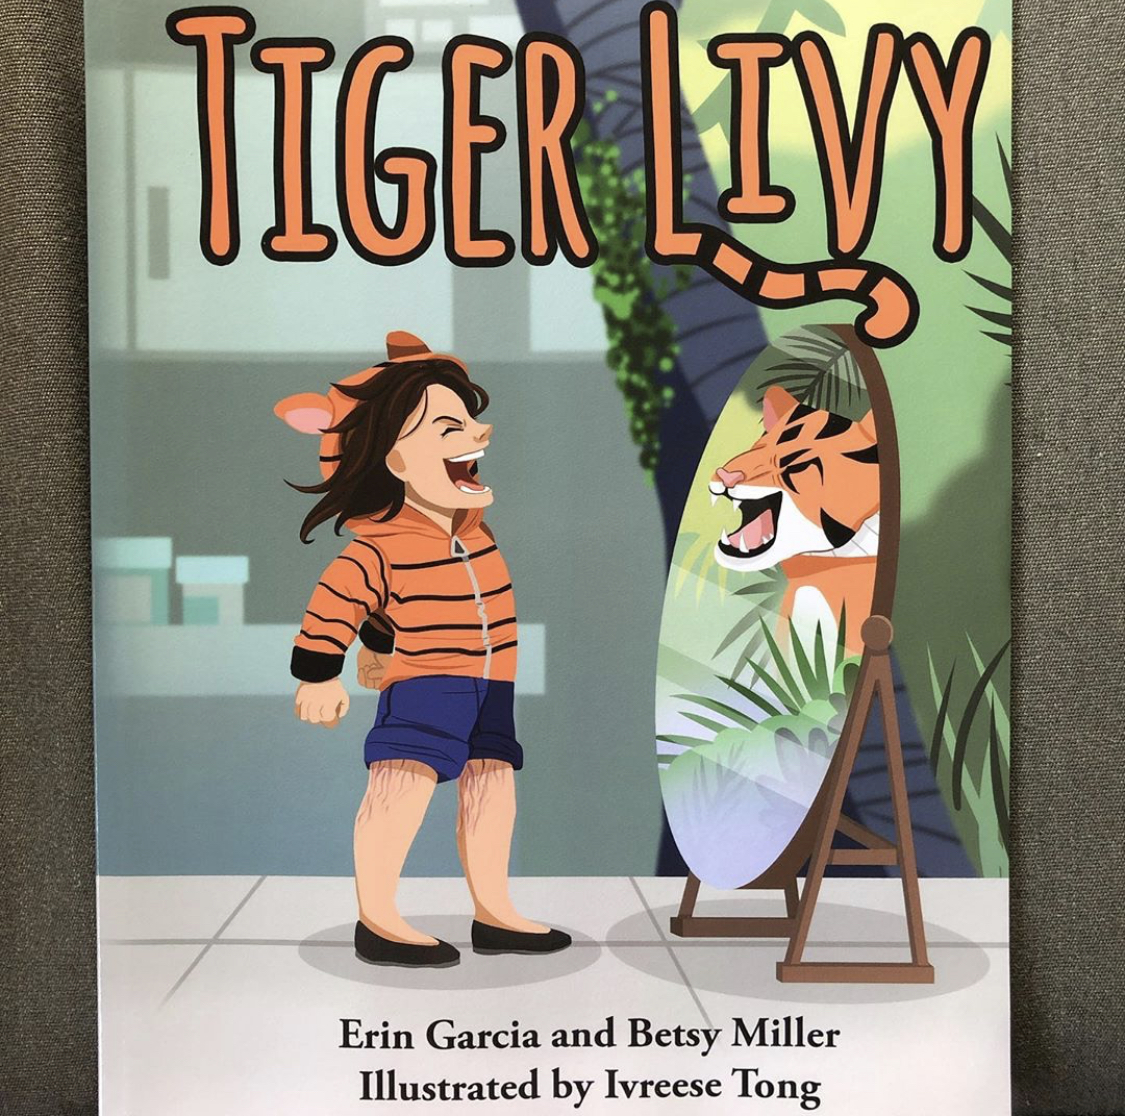 Tiger Livy’s Story – An interview with Erin Garcia and Betsy Miller